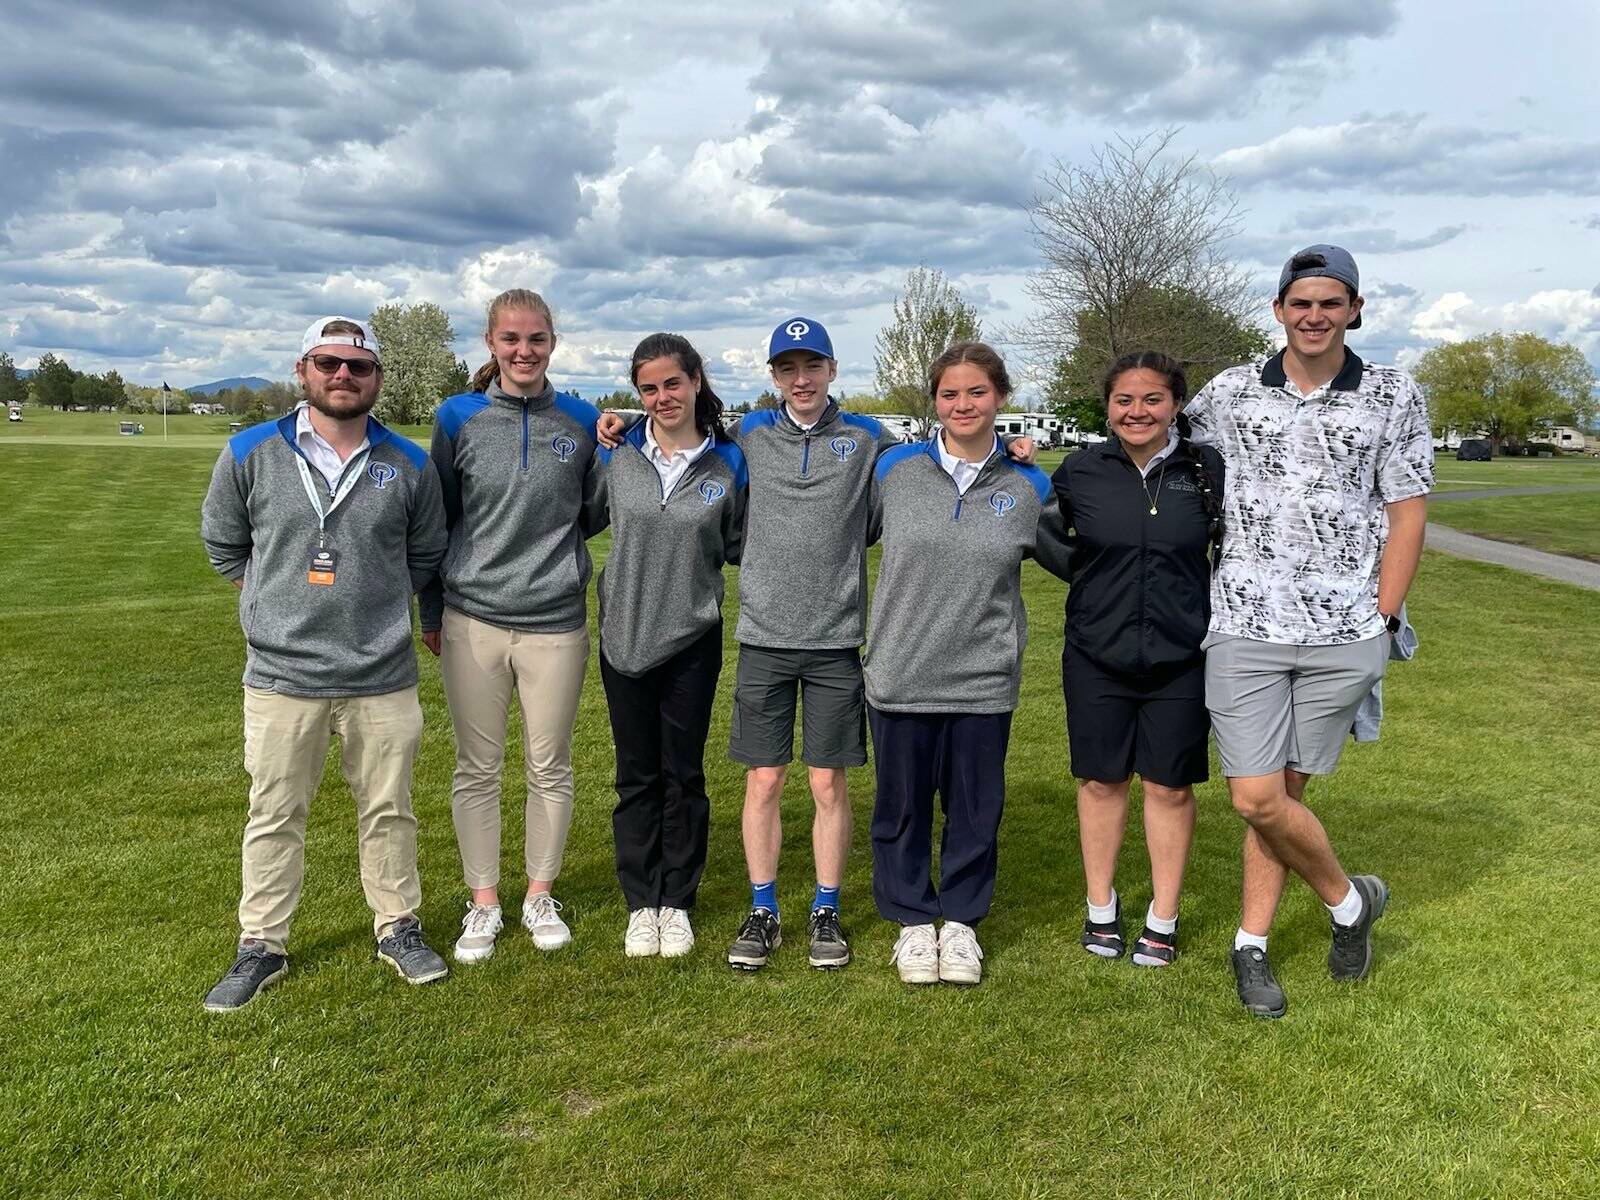 Contributed photo
The Orcas Island Vikings Golf Team. Left to right: Coach Ryan Kennedy, Bethany Carter, Paula Gutierrez Latorre, Sam Sutton, Lili Malo, Tayla Malo and Burly Hildreth at the state championship.